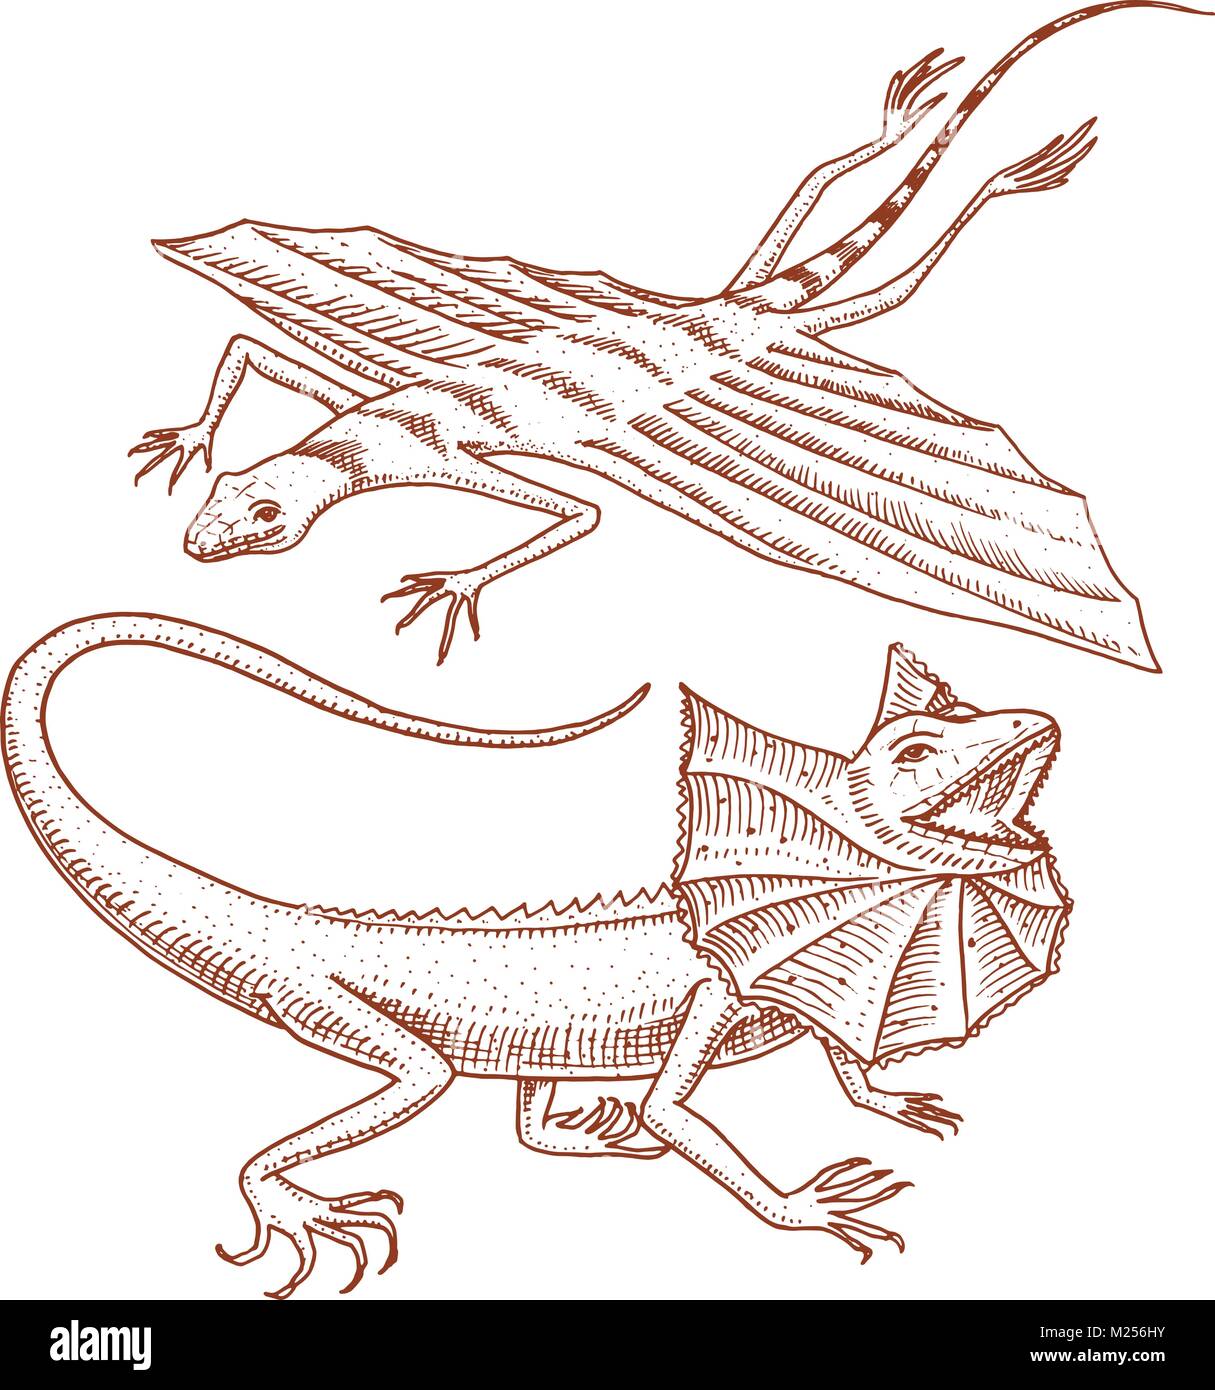 frilled-necked lizard, flying dragon or agama in Australia. wild animals in nature. vector illustration for book or pet store, zoo. engraved hand drawn. Stock Vector